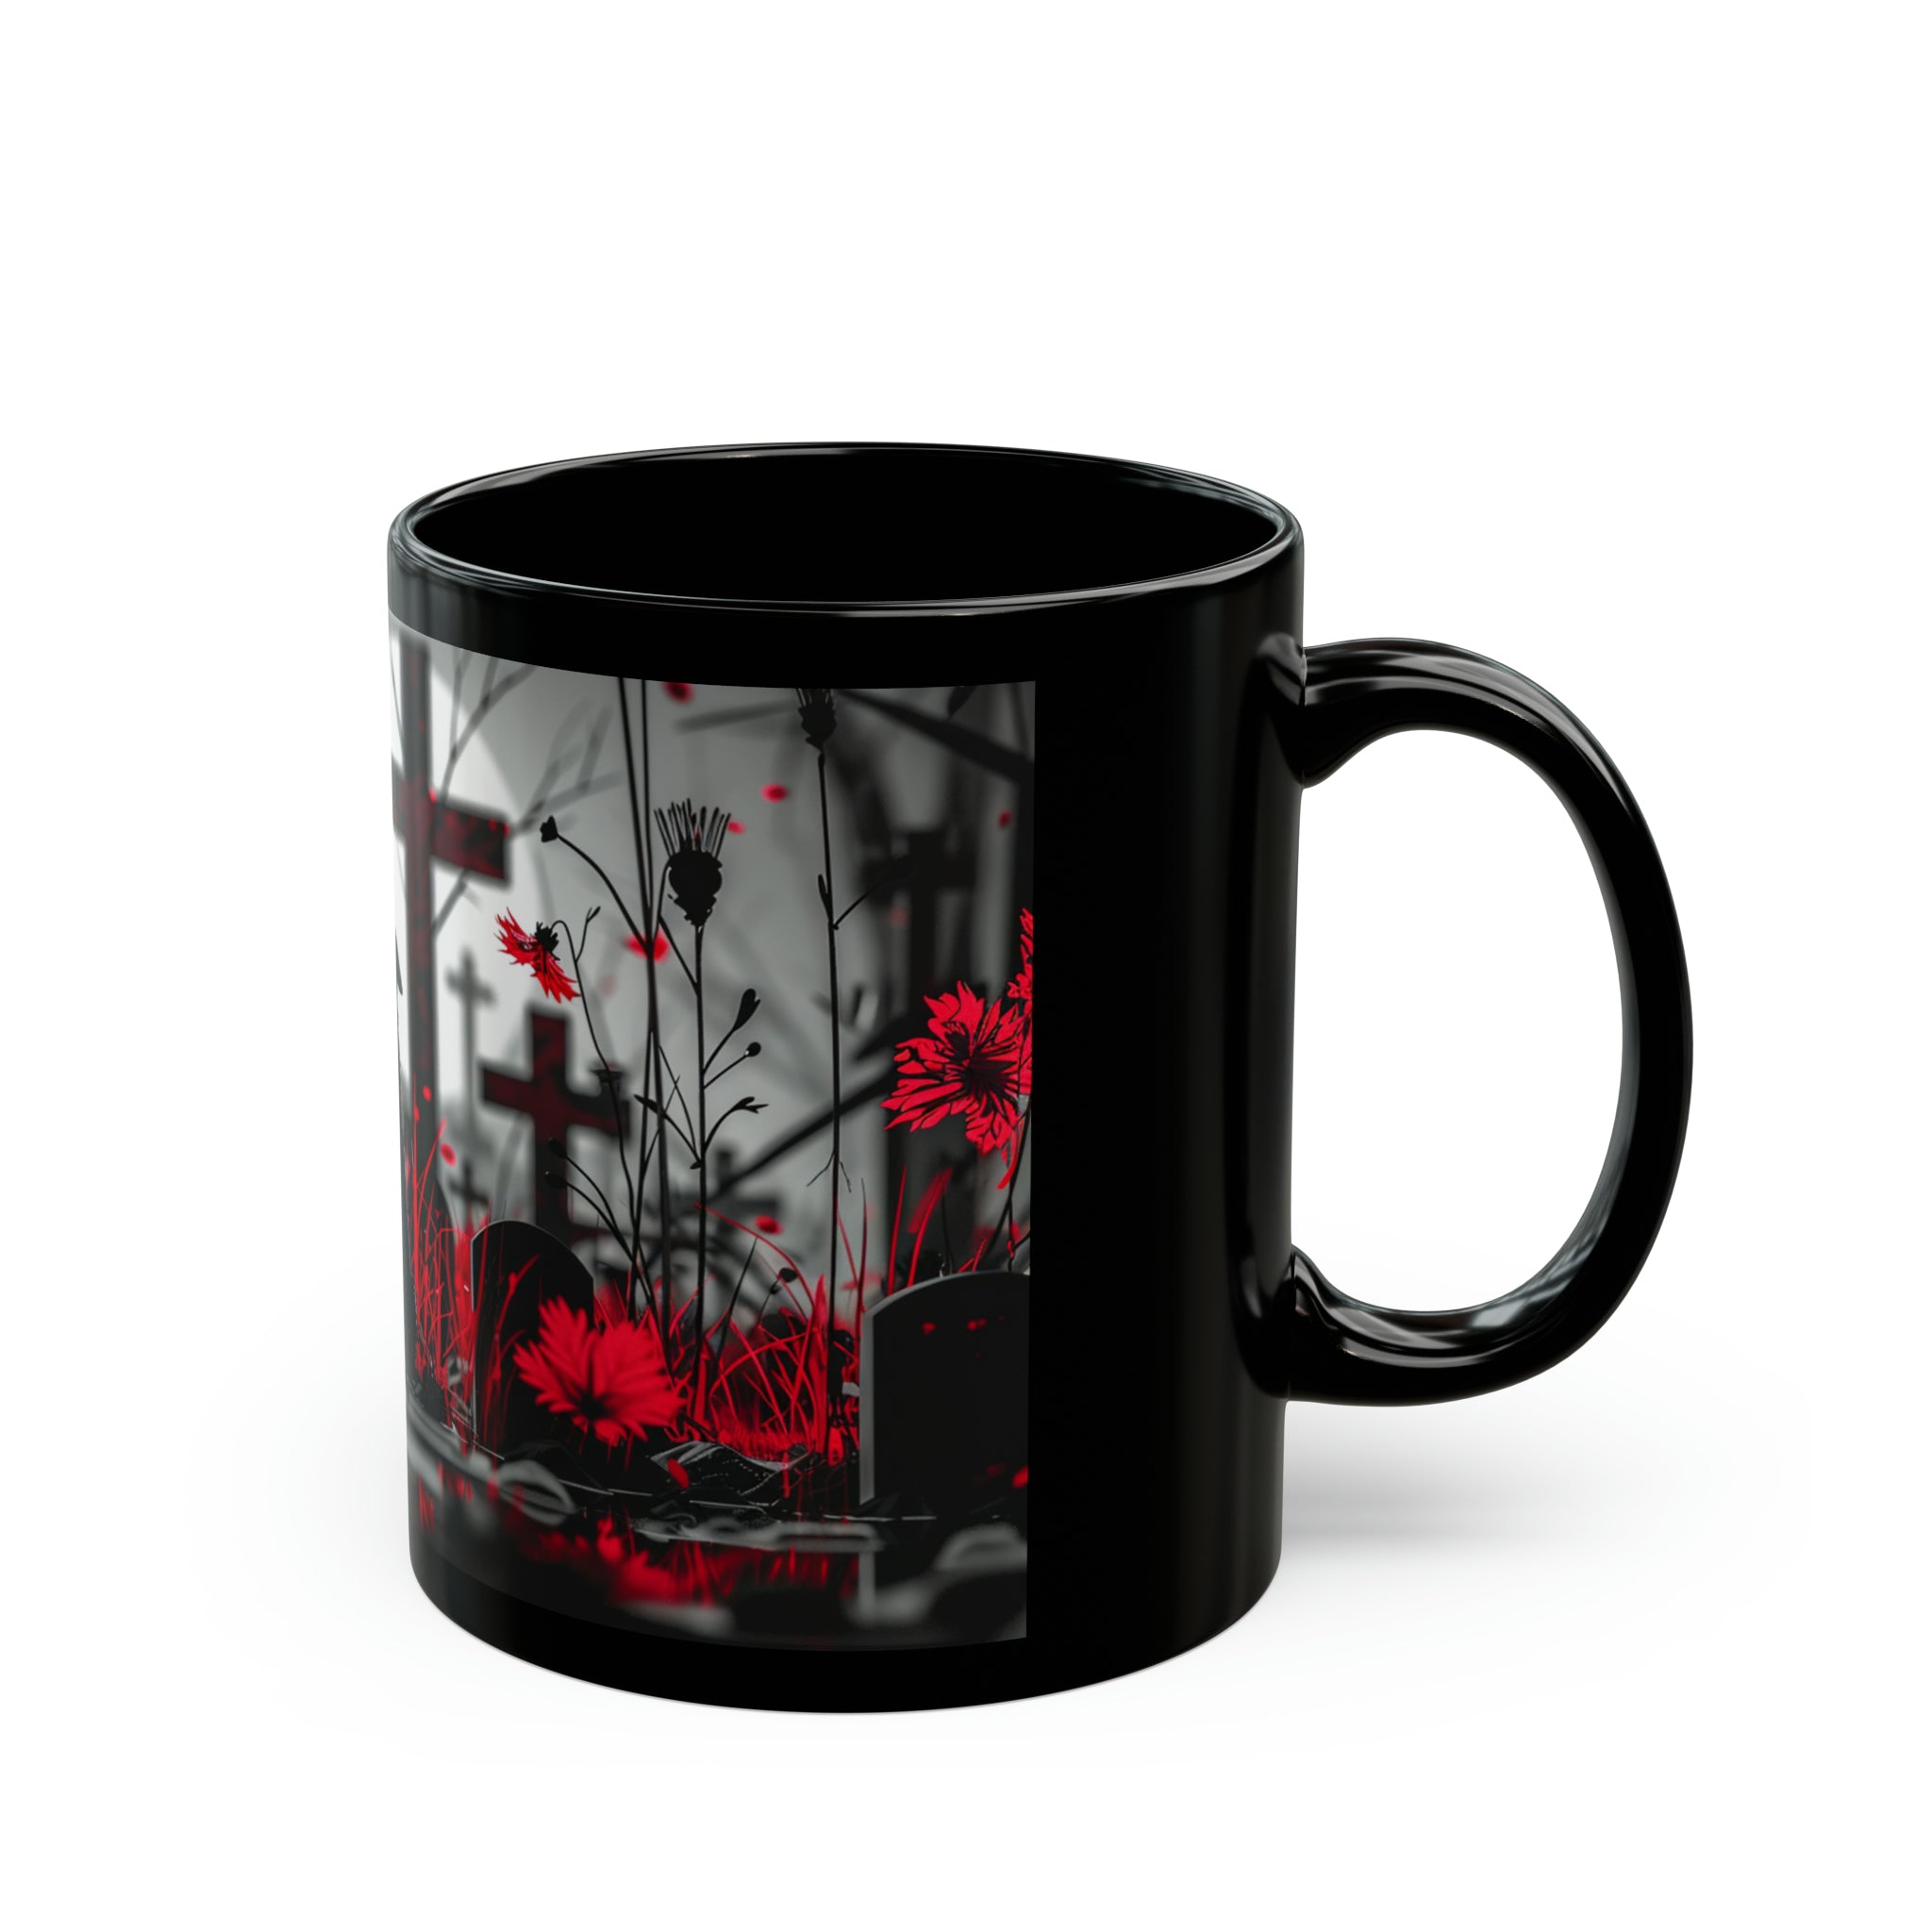 The image showcases a sleek, black ceramic mug, adorned with an artistic rendering of a loyal dog, depicted as a guardian angel. The design elegantly wraps around the mug, visible on both the 11oz and 15oz versions, embodying the spirit of solemn loyalty and protection that our canine friends provide.